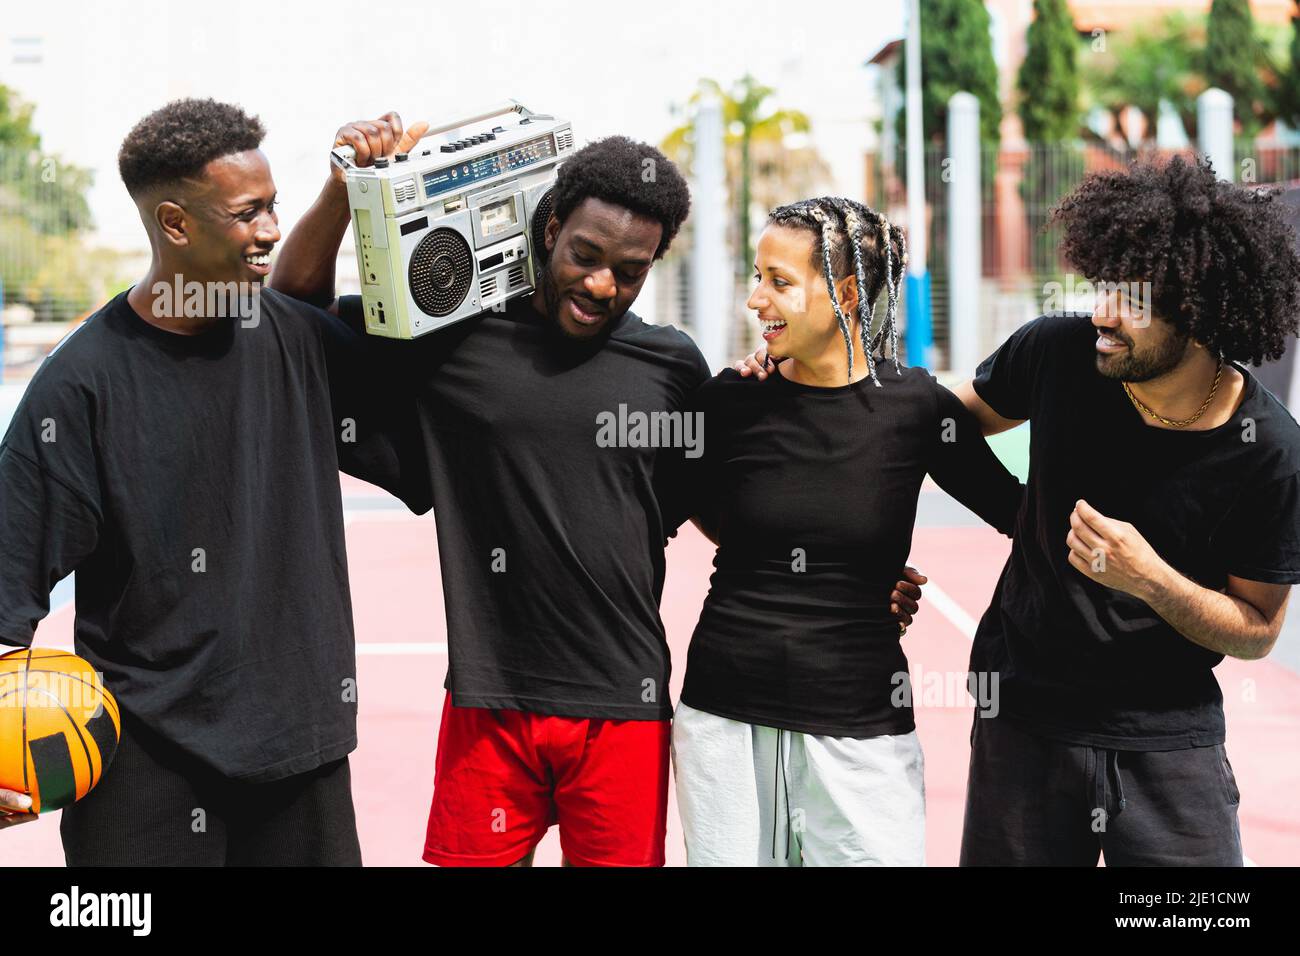 Young African American people having fun listening music with vintage boombox outdoor - Urban street people lifestyle Stock Photo